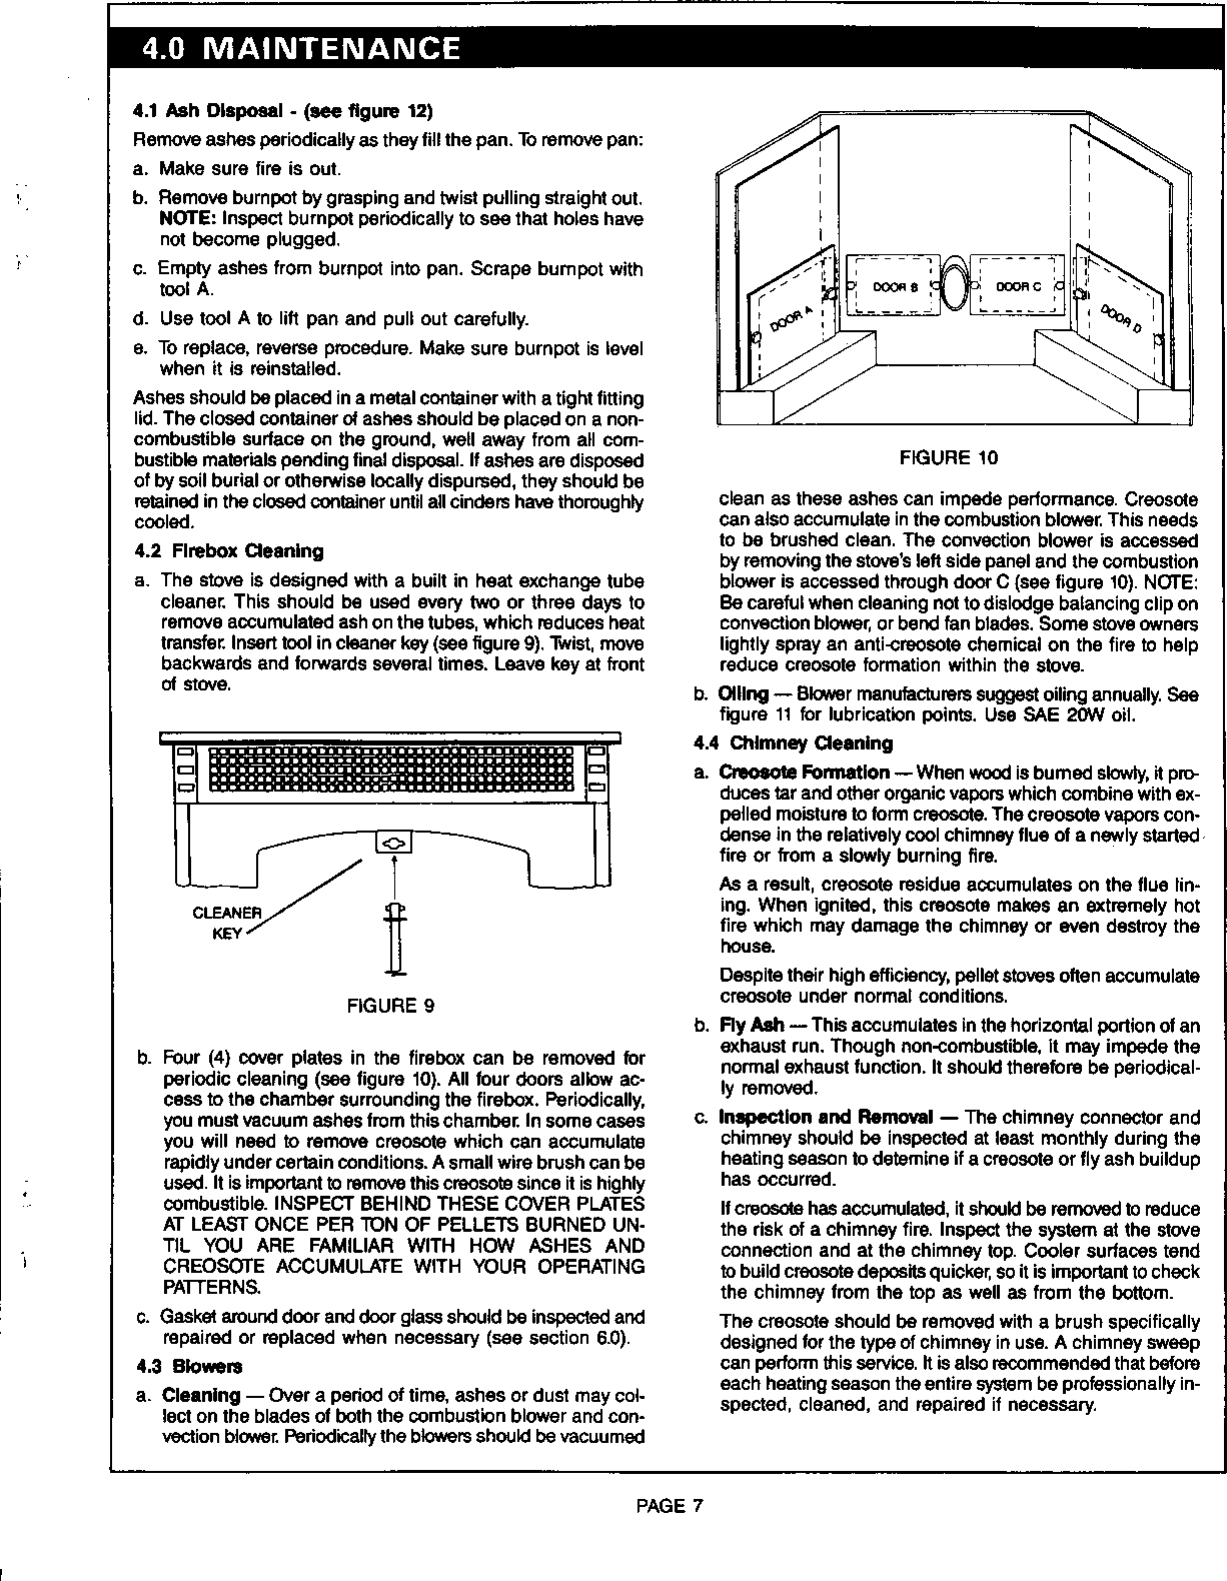 Page 7 of 9 - Breckwell Breckwell-1991-s-P24Fs-Users-Manual- P24 Blazer Pellet Stove Owner's Manual  Breckwell-1991-s-p24fs-users-manual